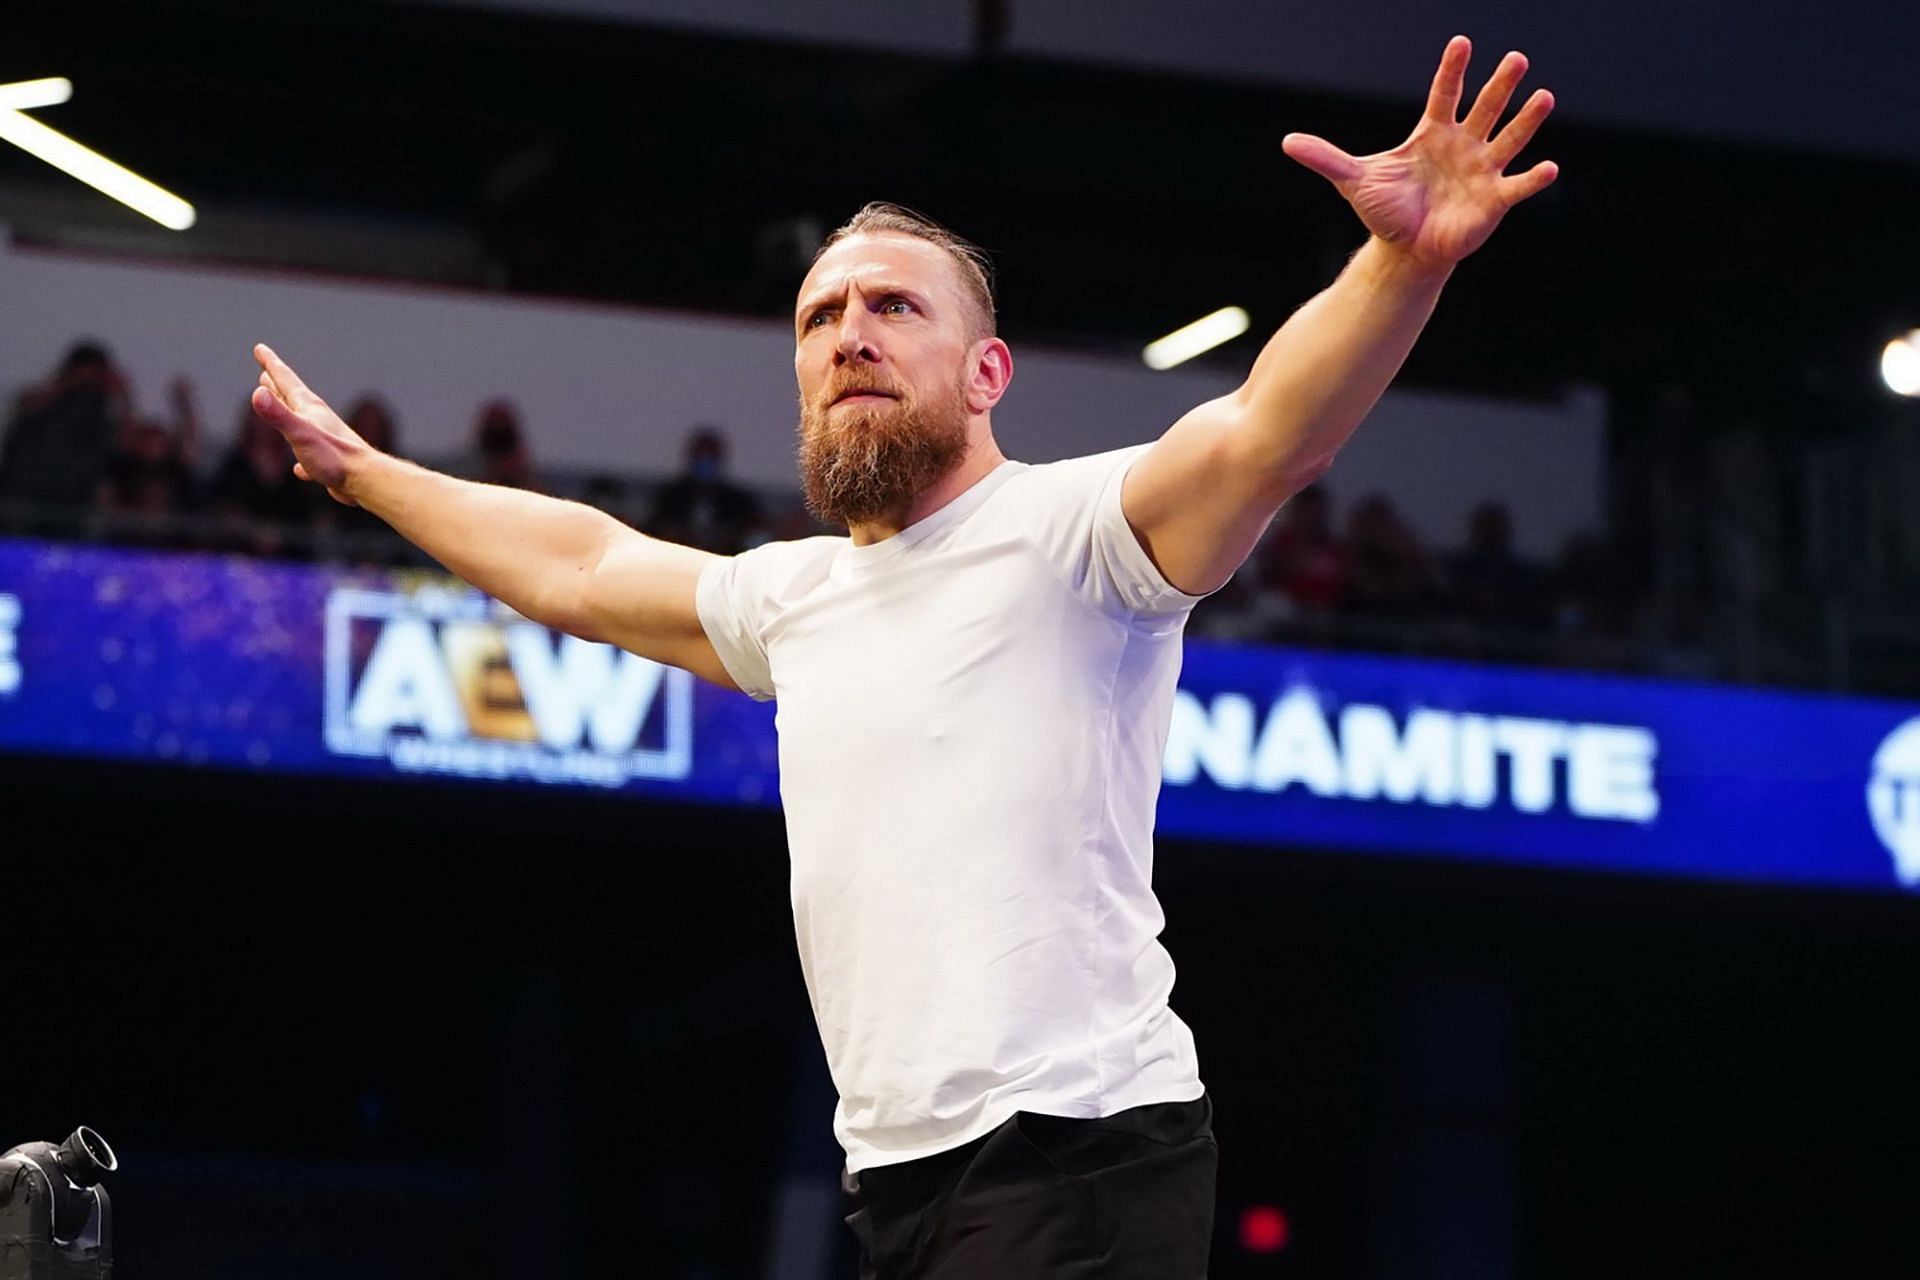 Bryan Danielson has been unstoppable in AEW.